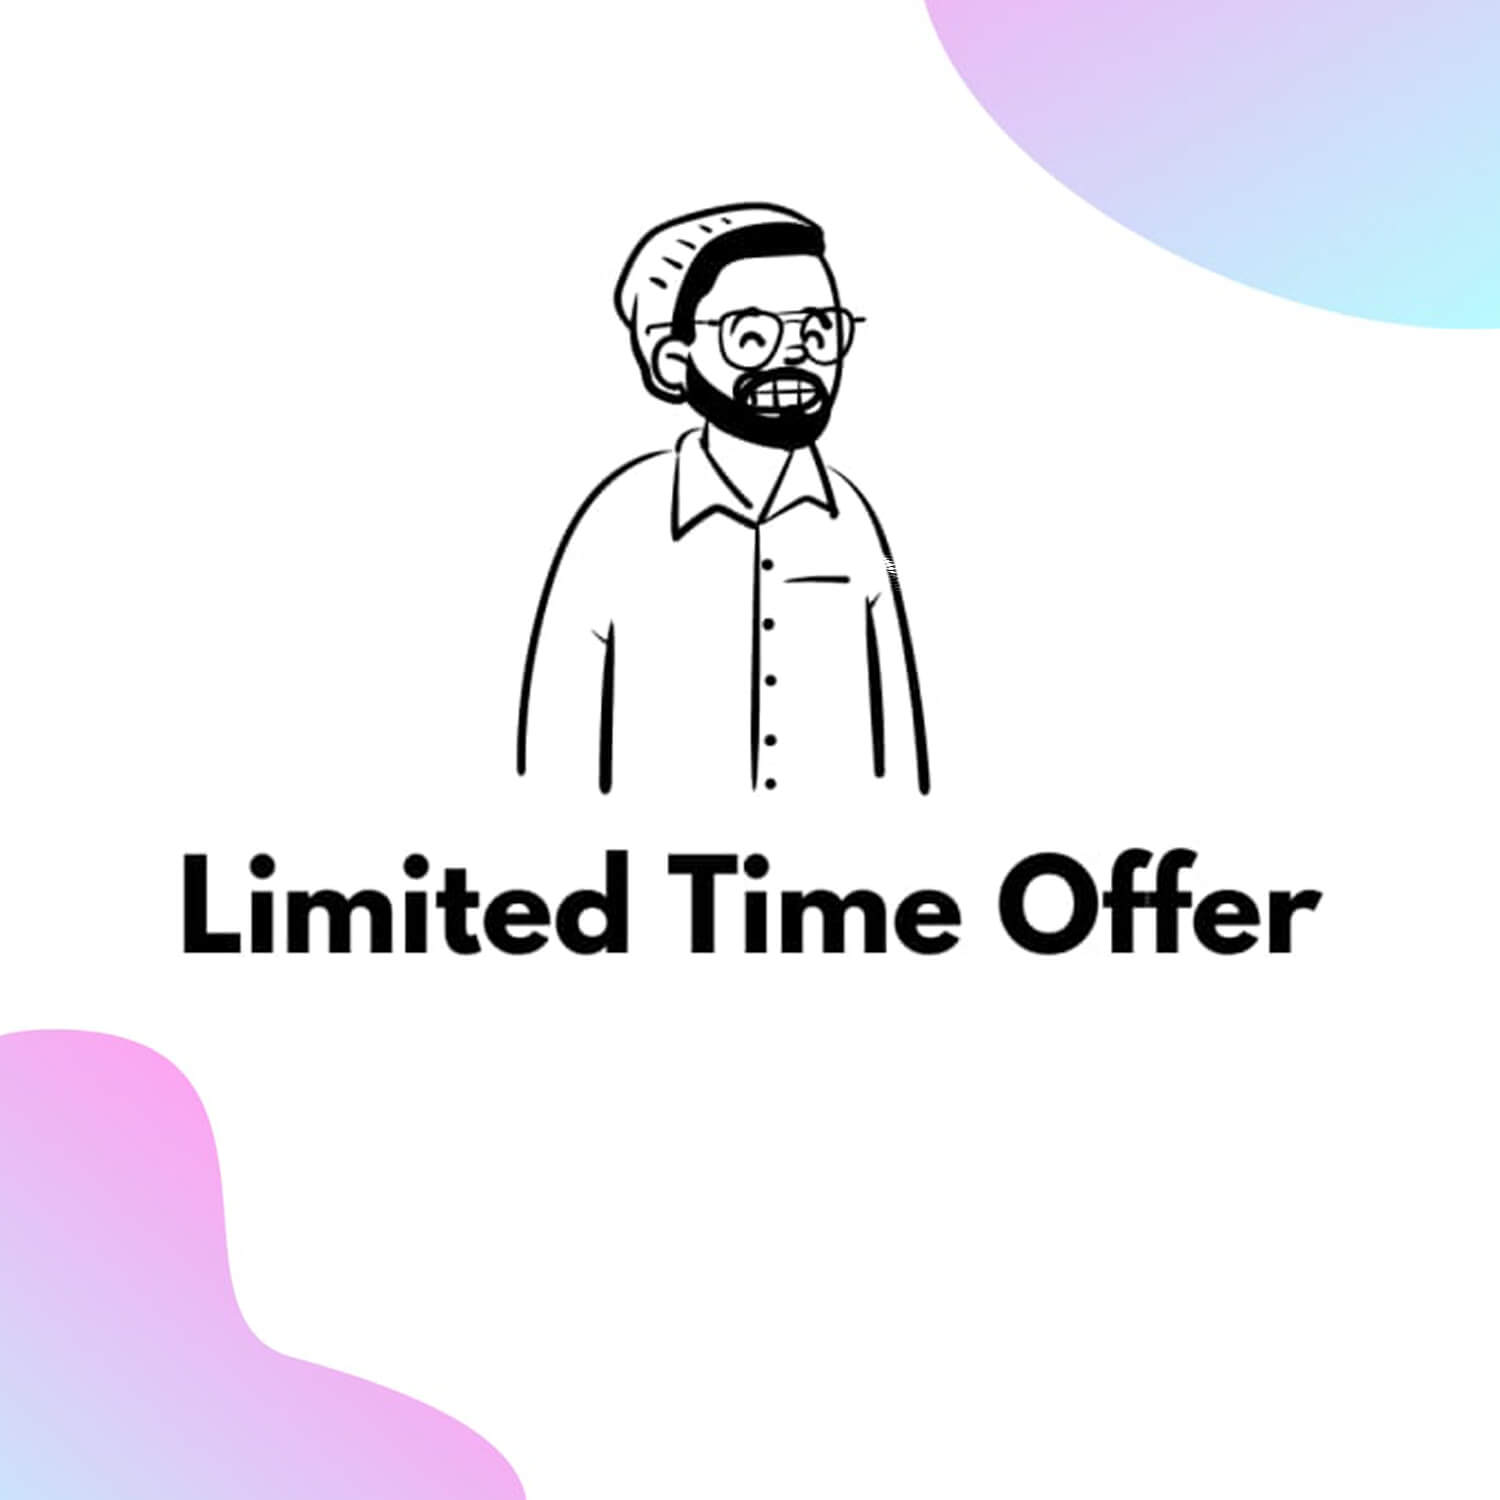 A smiling man is drawn, and next to it is an inscription "Limited Time Offer".